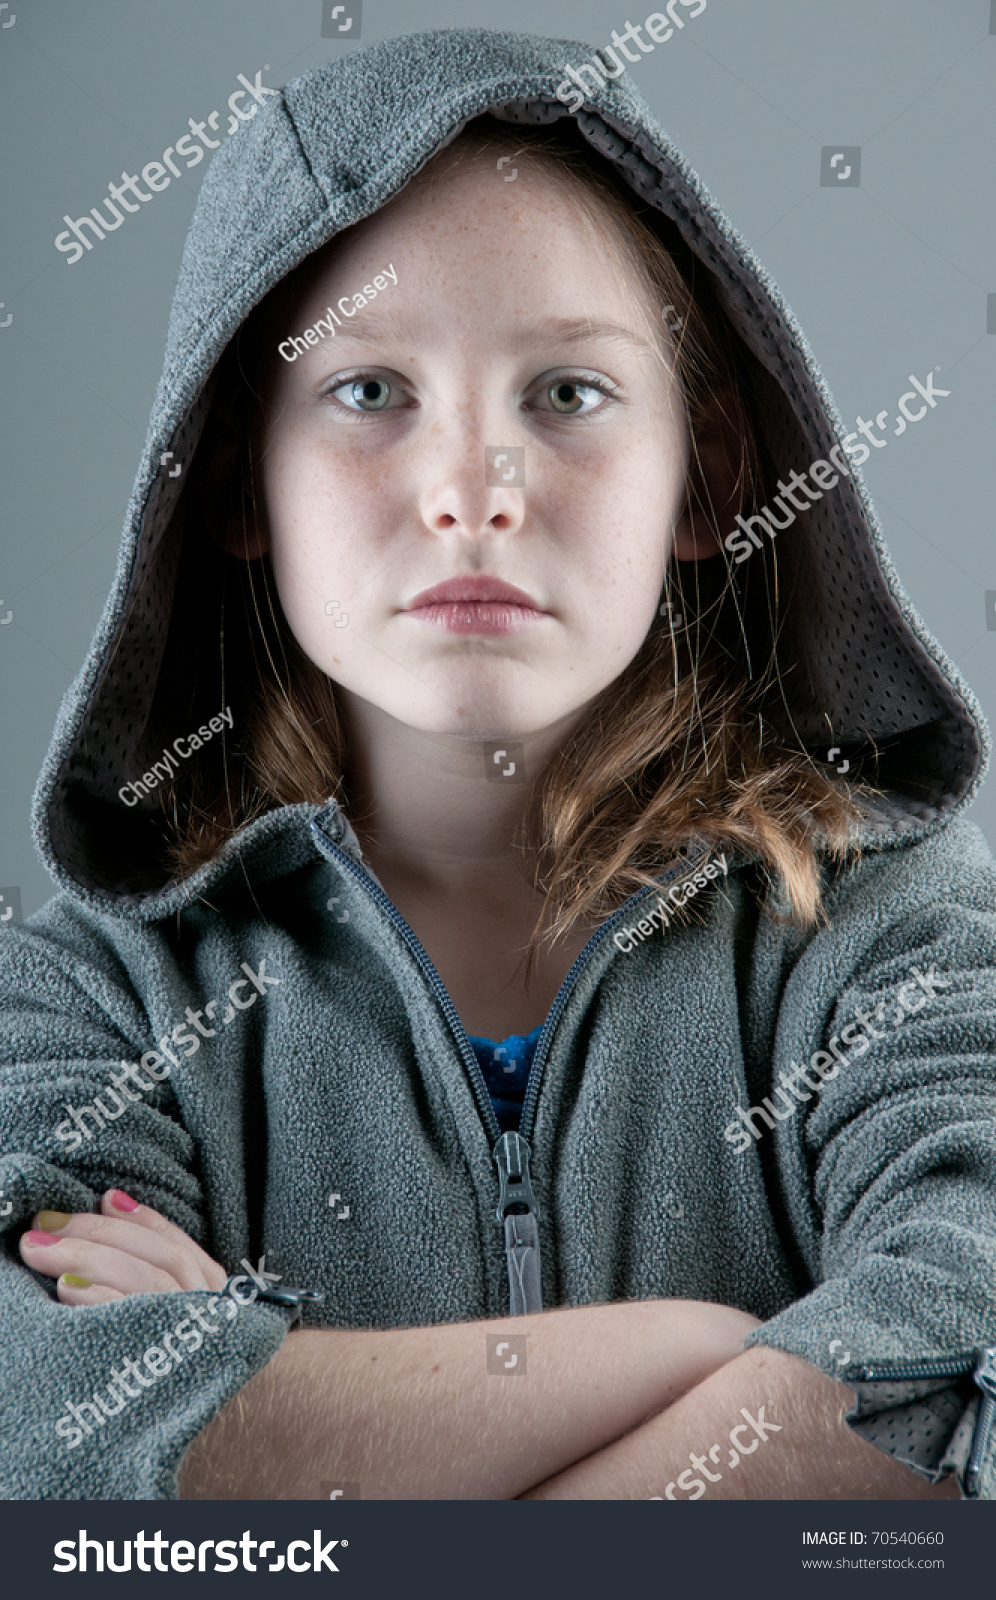 Serious Girl With Pretty Eyes Stock Photo 70540660 : Shutterstock